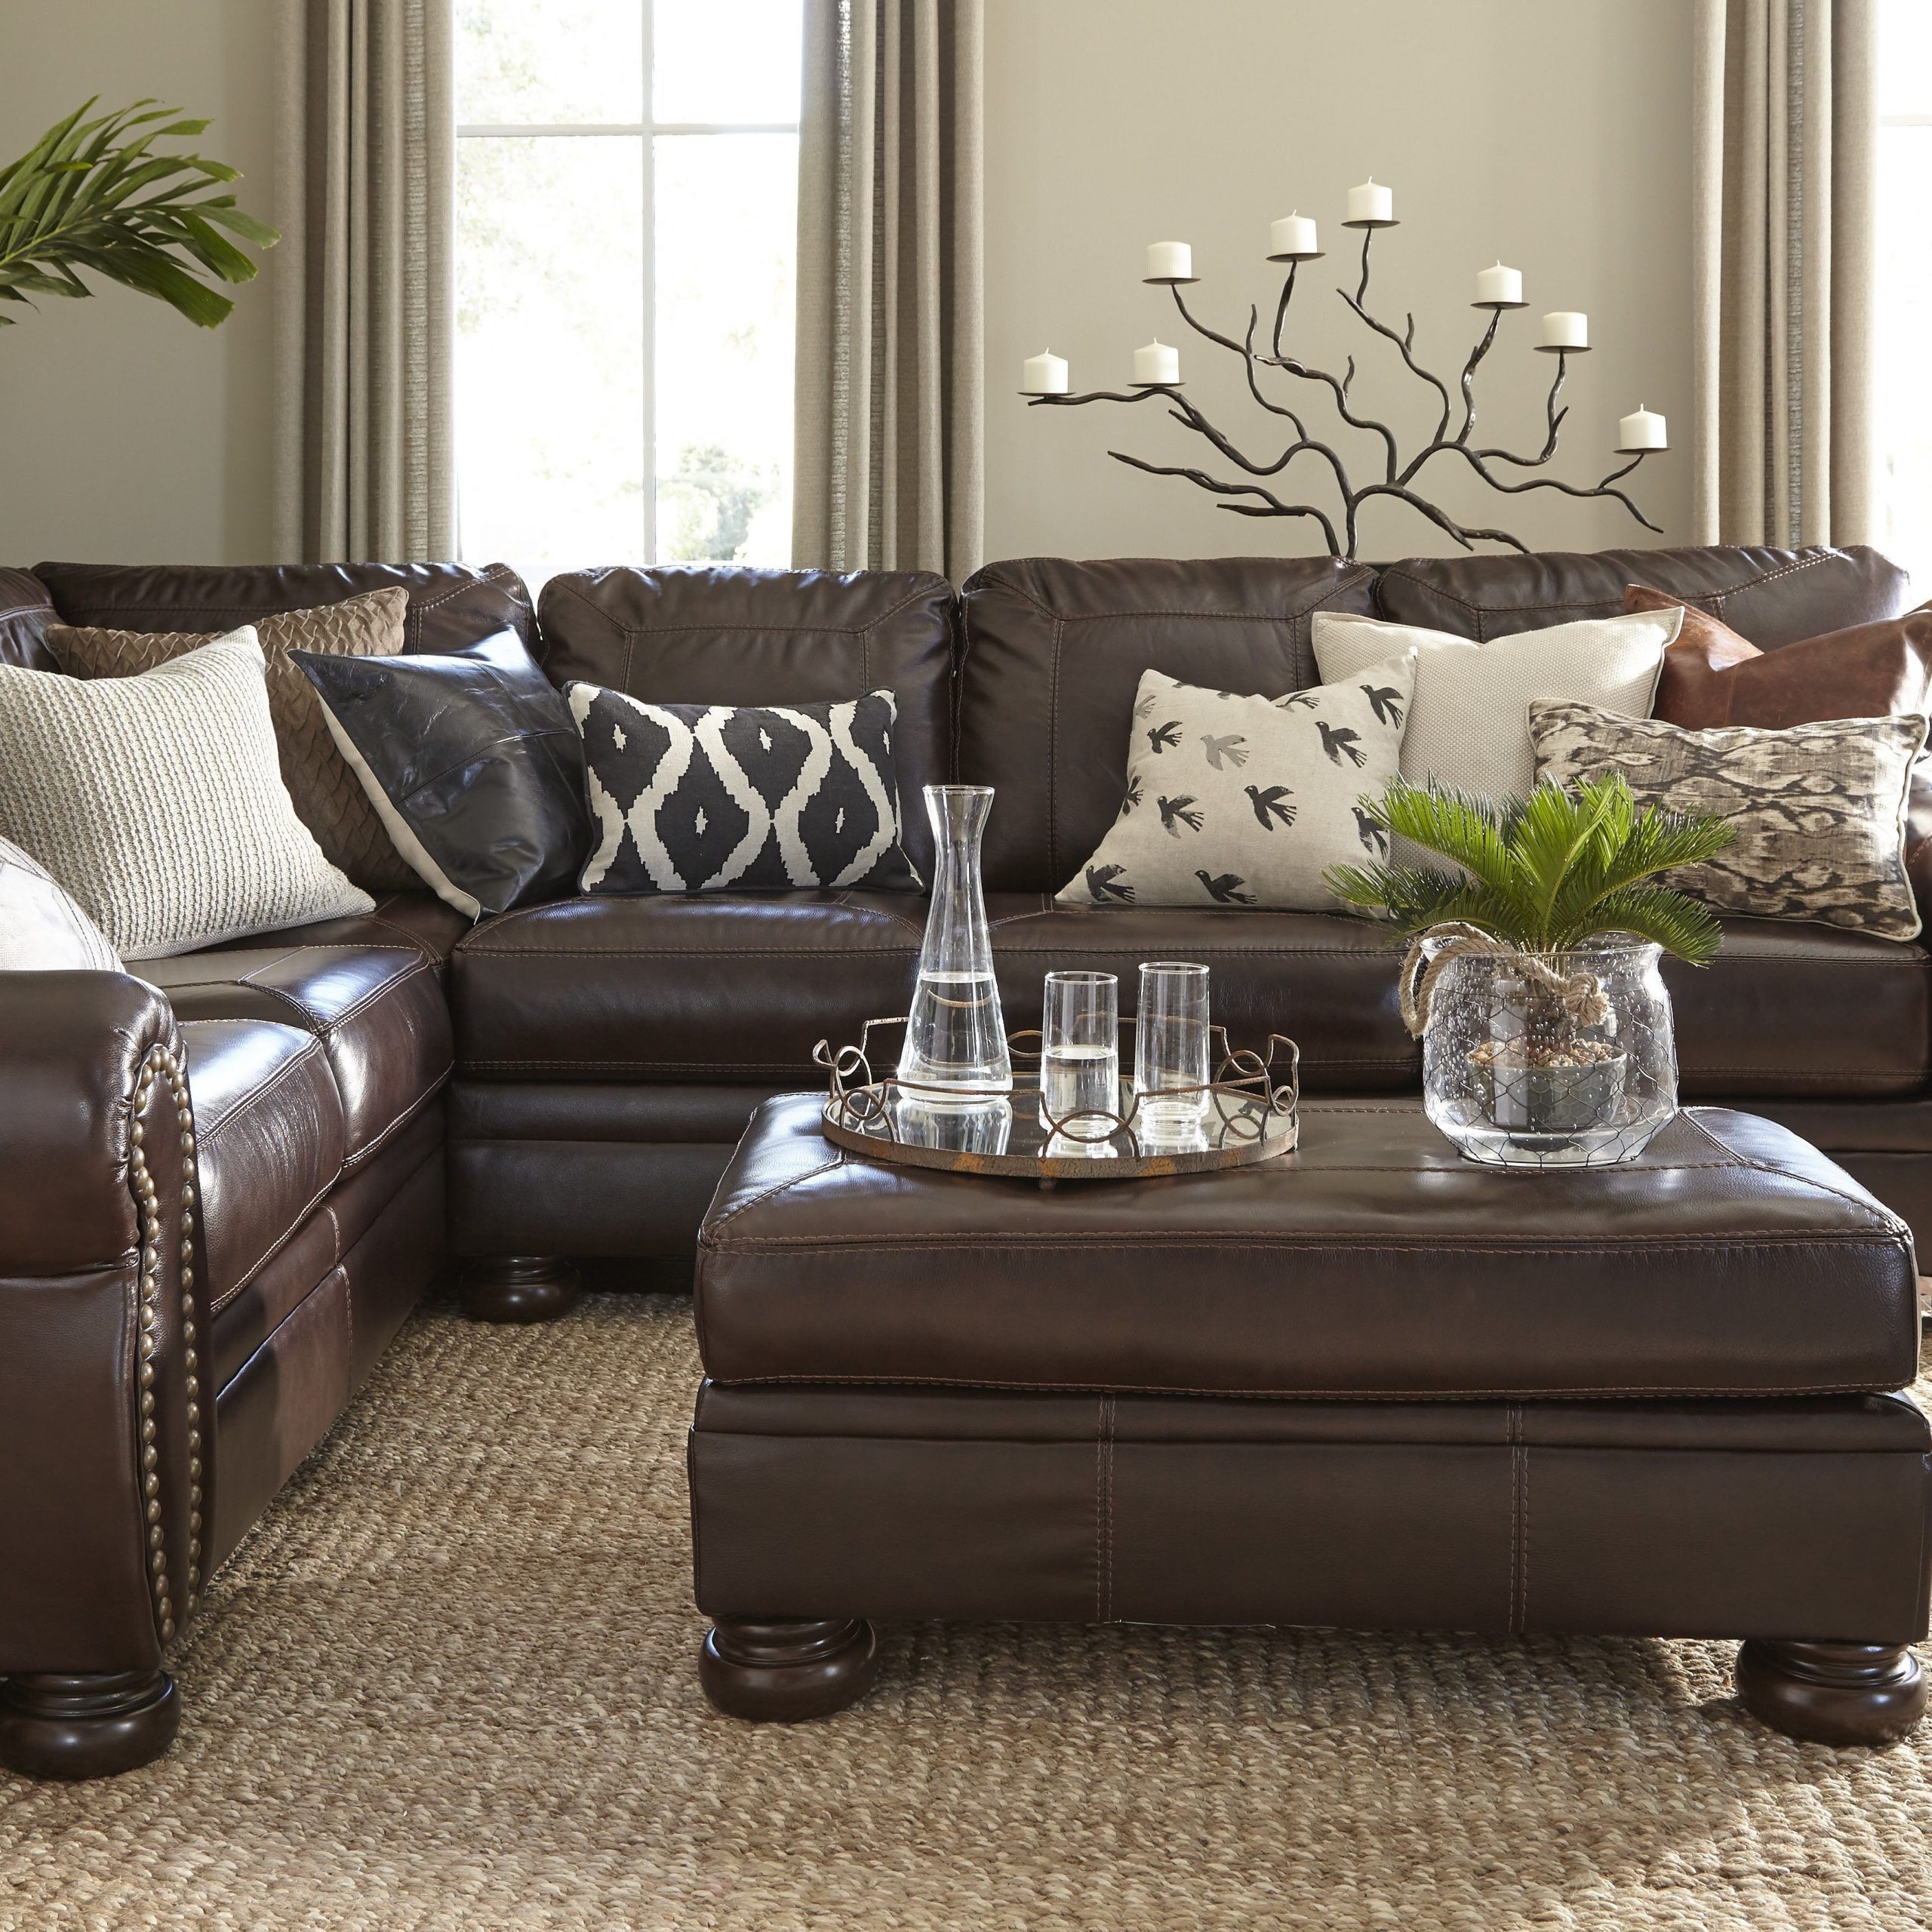 Chocolate Brown Leather Sofas – Sofa Living Room Ideas Regarding Faux Leather Sofas In Chocolate Brown (Gallery 14 of 20)